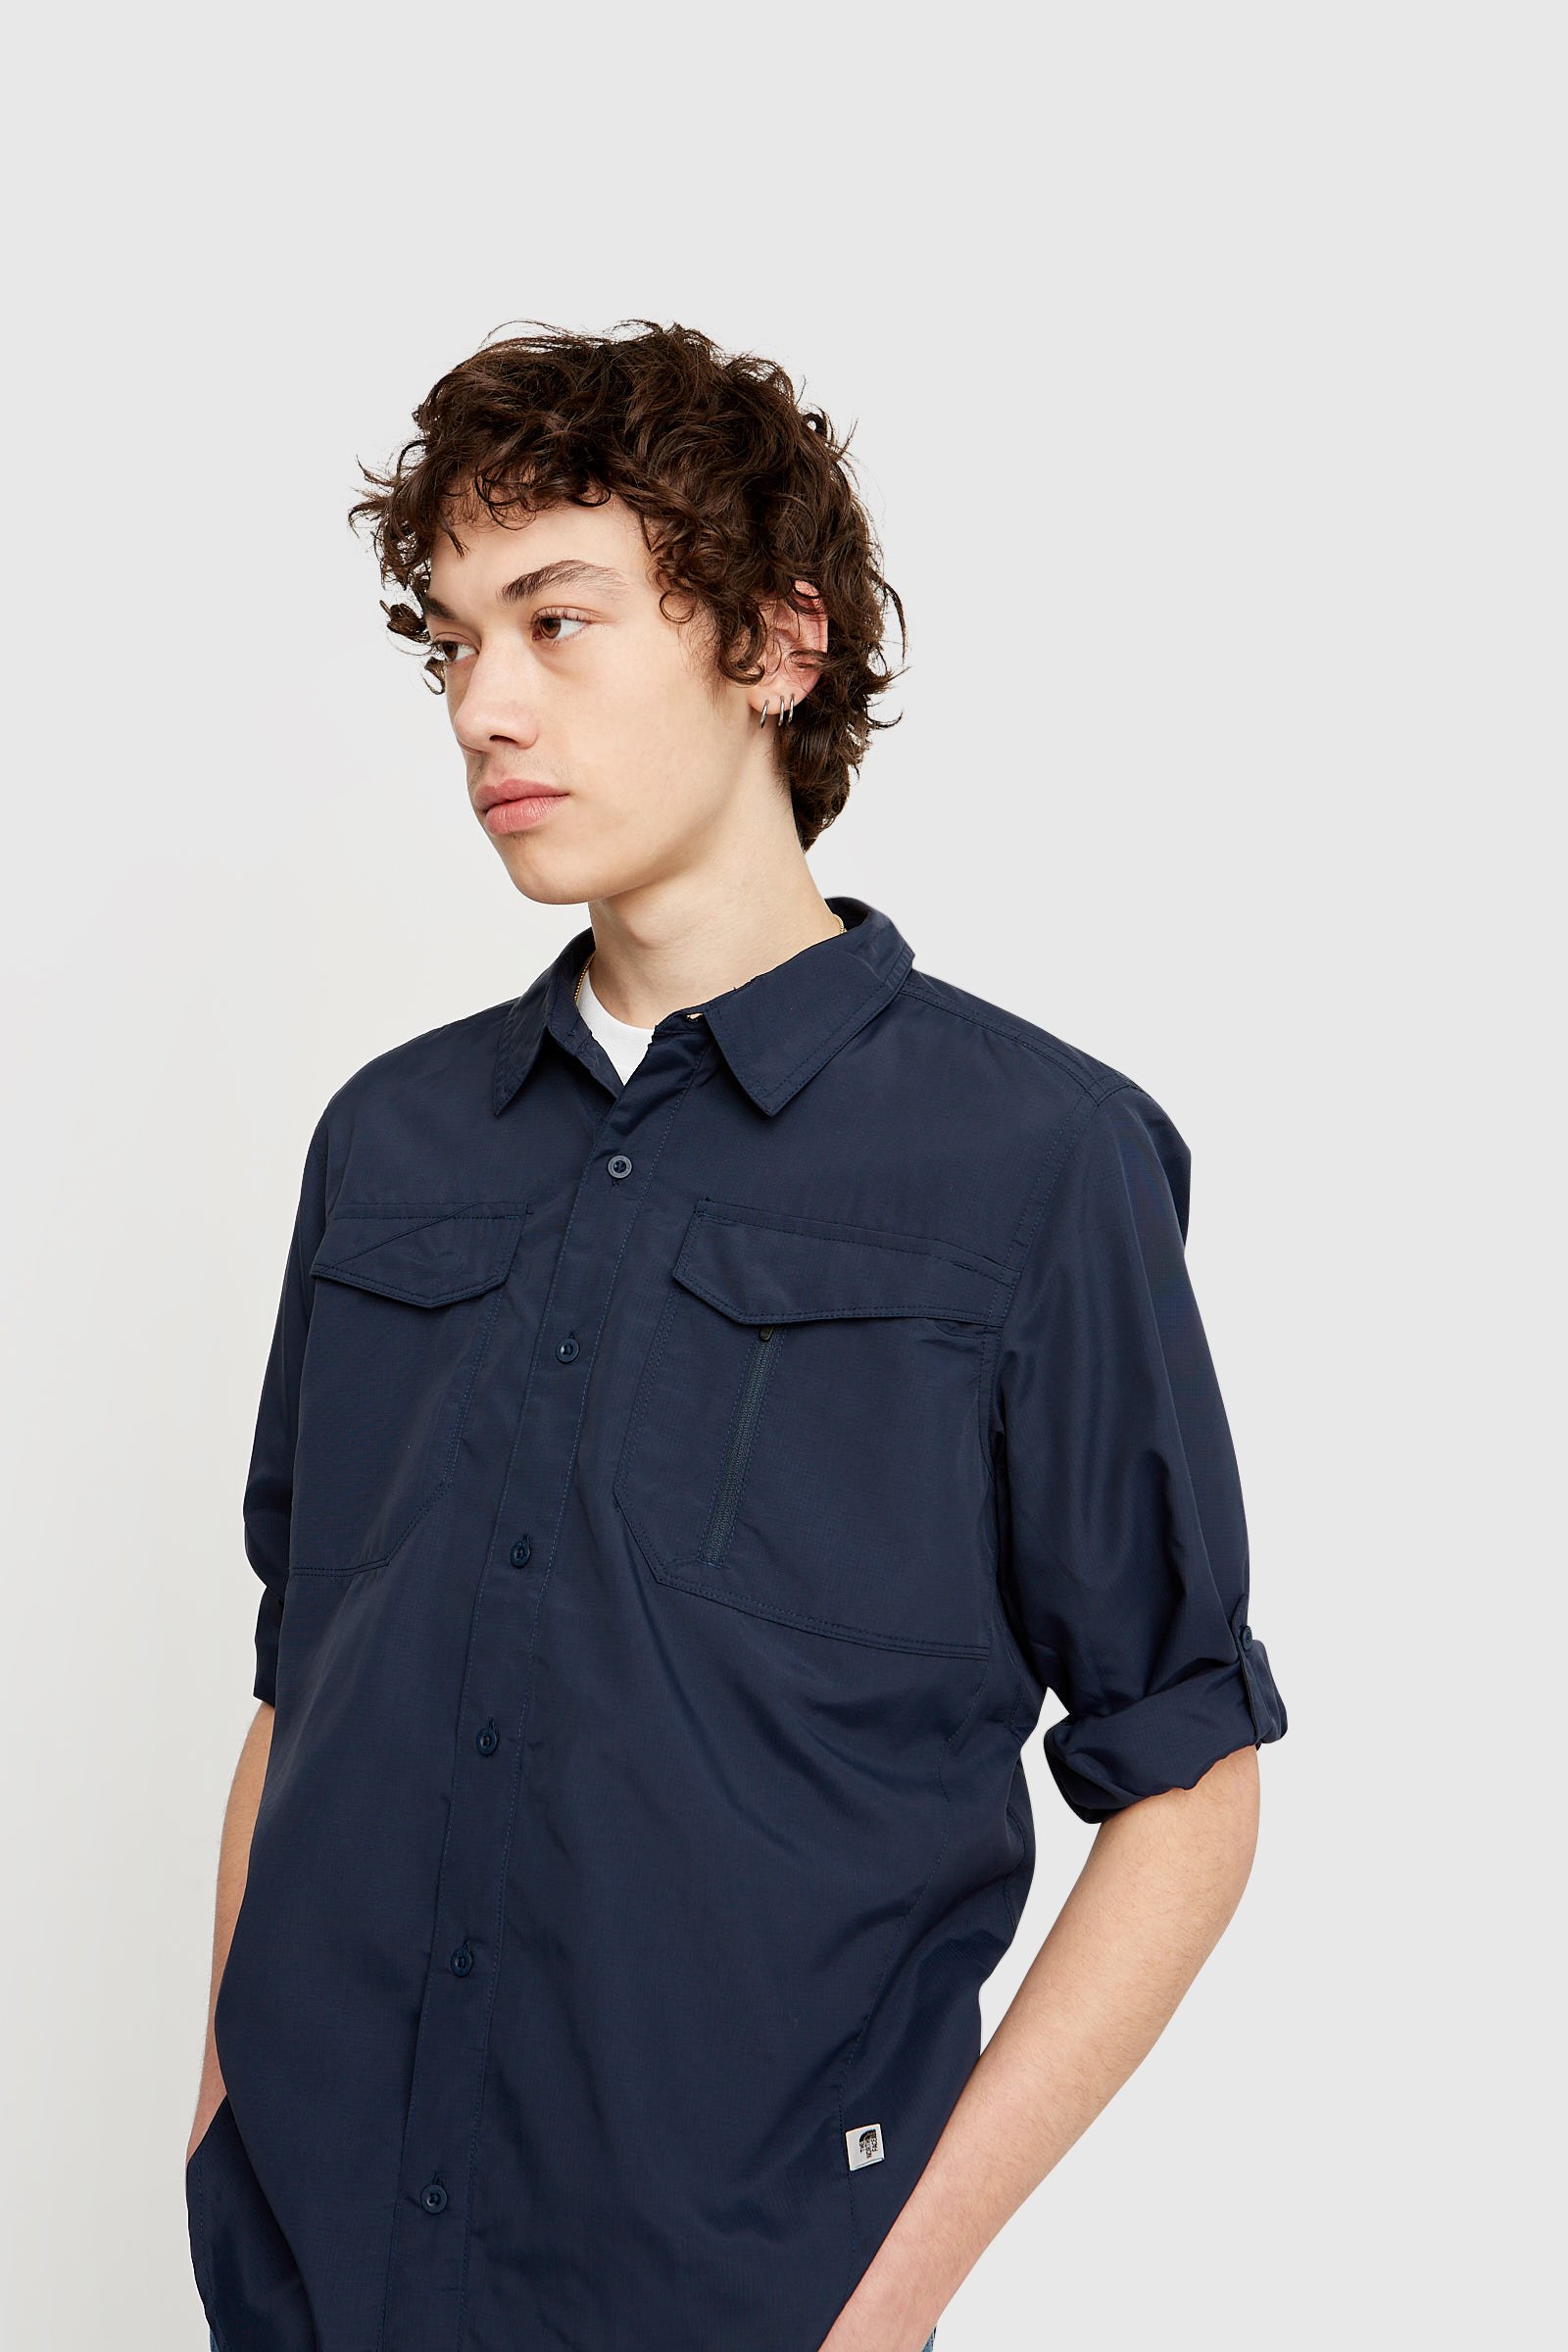 north face sequoia shirt